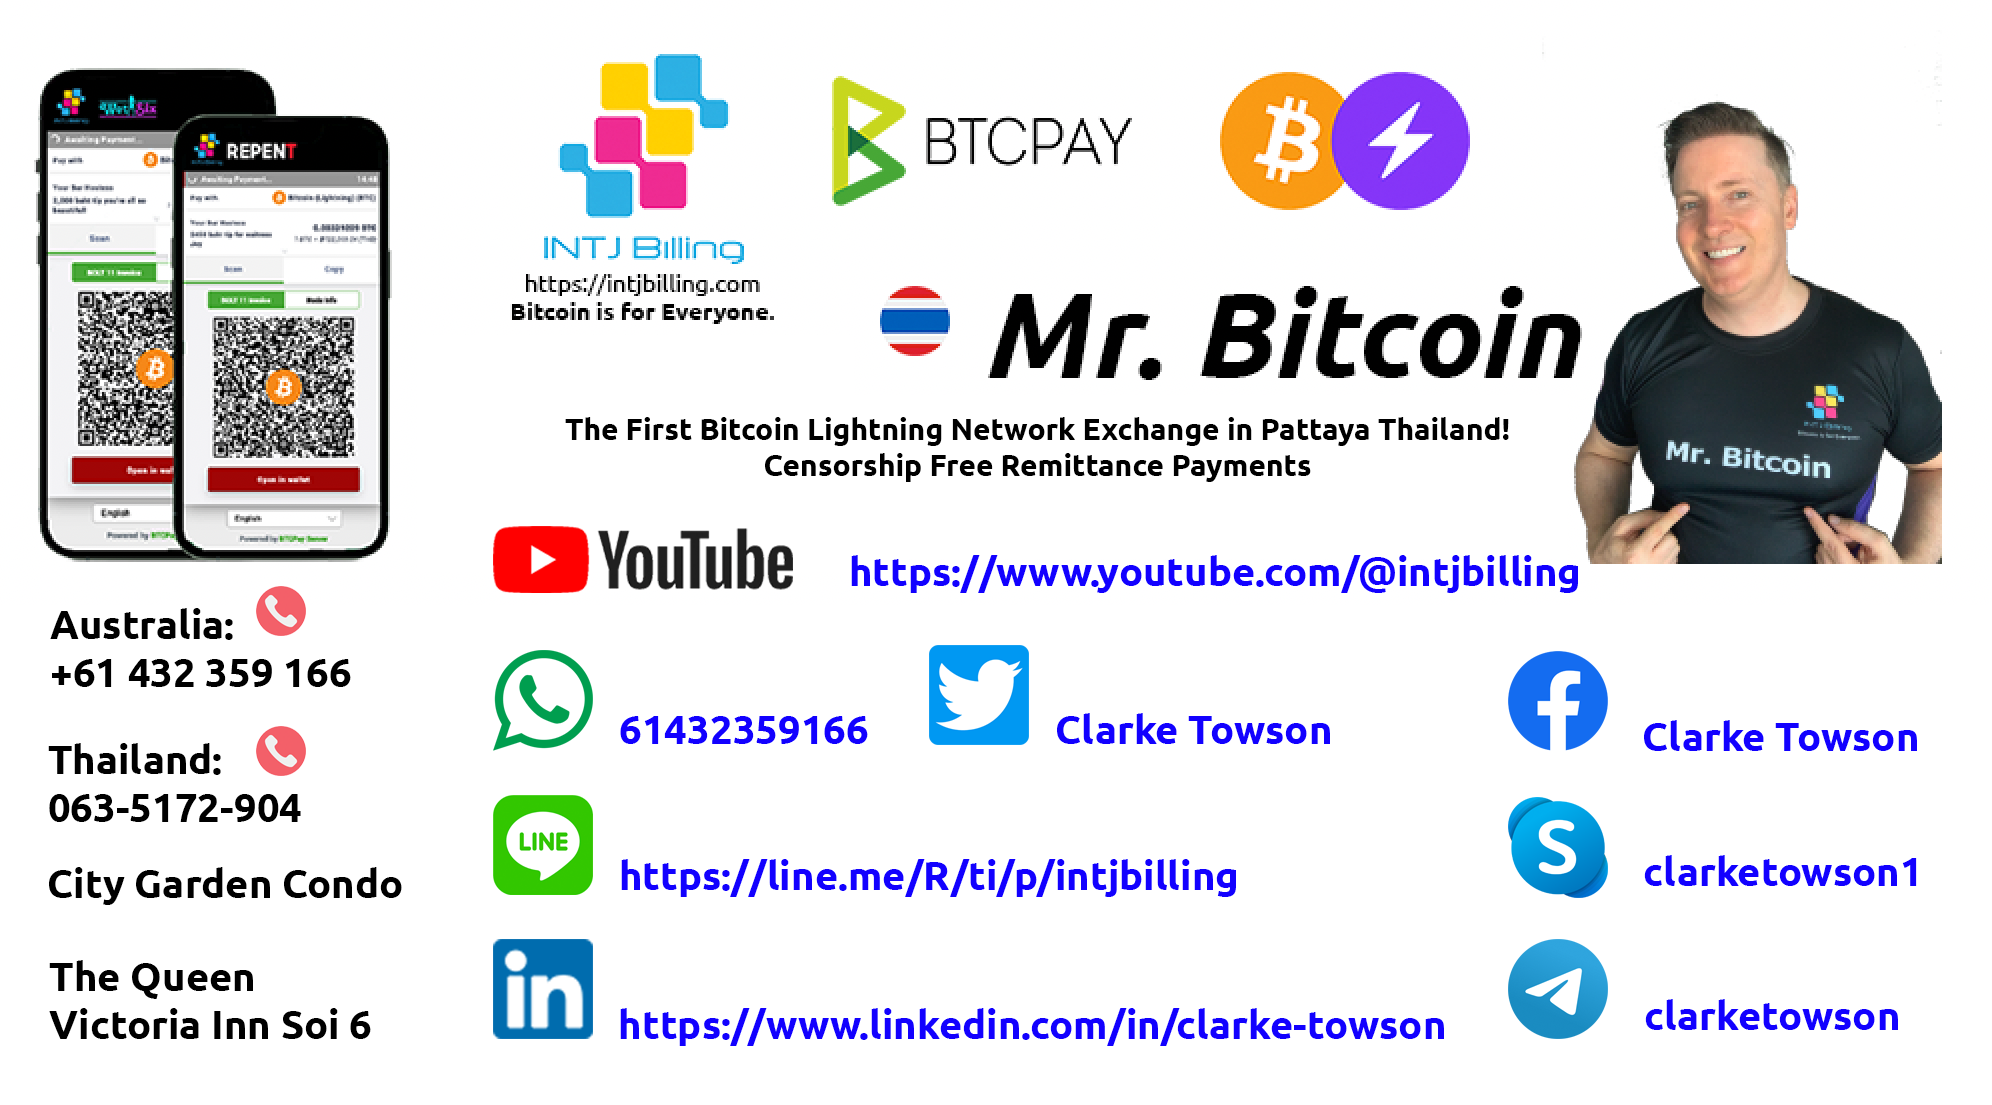 Contact Mr. Bitcoin today!